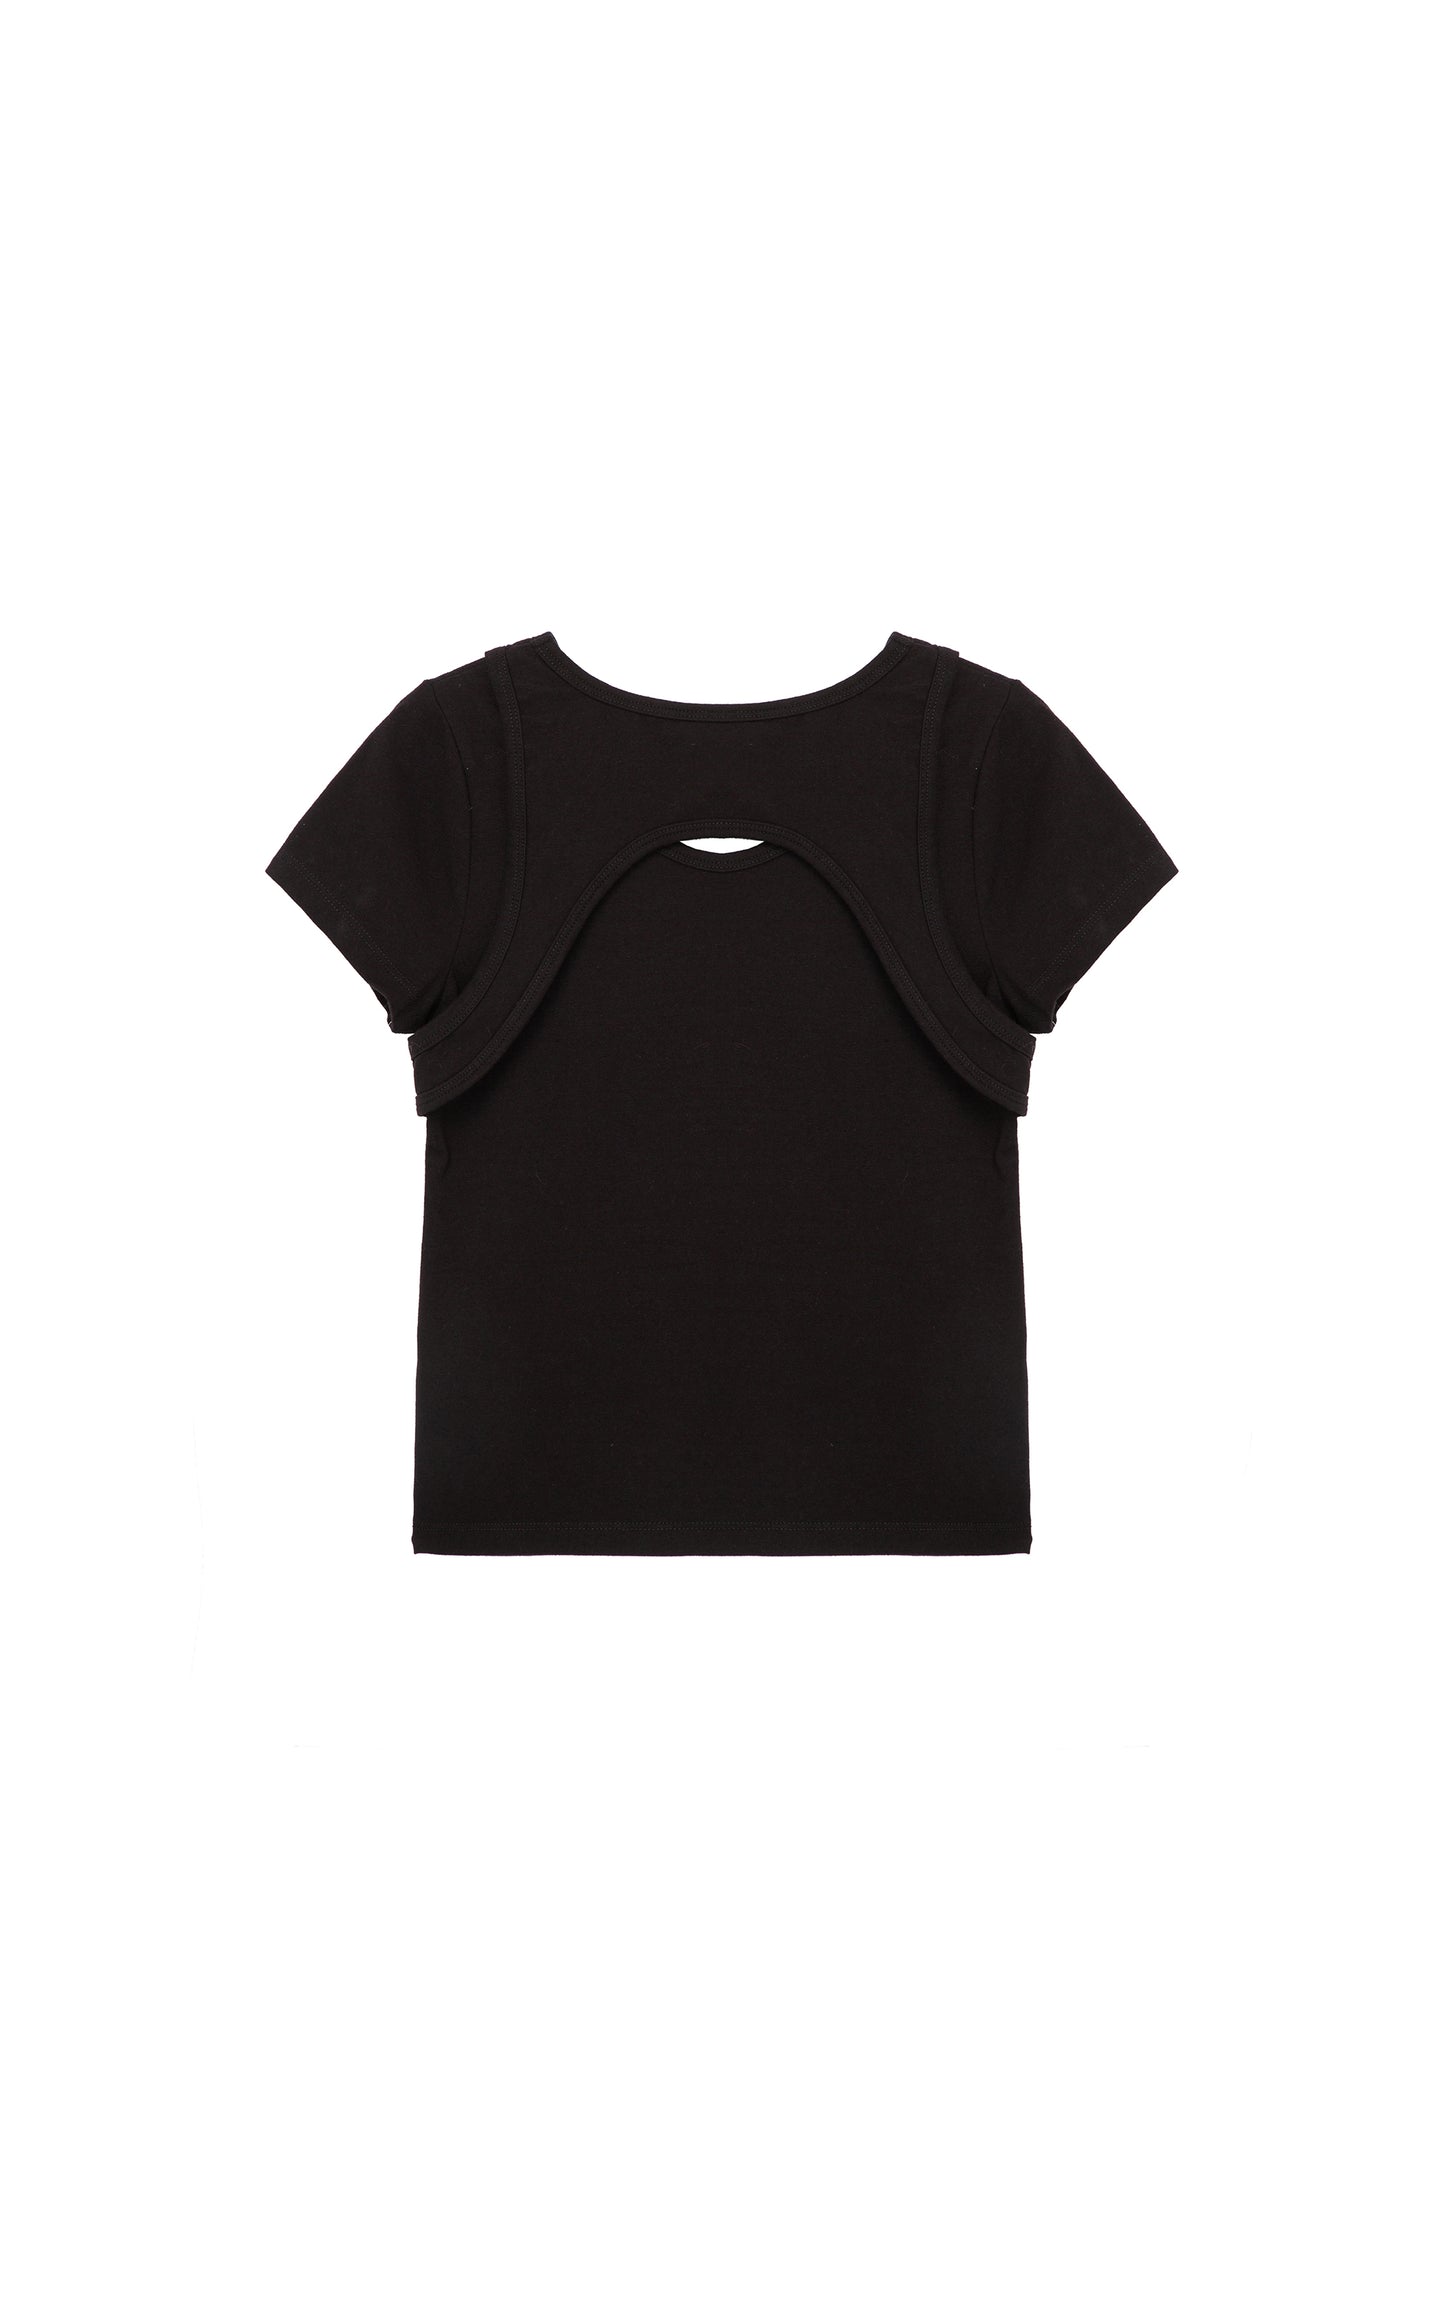 BACK OF BLACK SHORT SLEEVE TOP WITH A SMALL KEYHOLE CUT-OUT AT THE UPPER BODICE